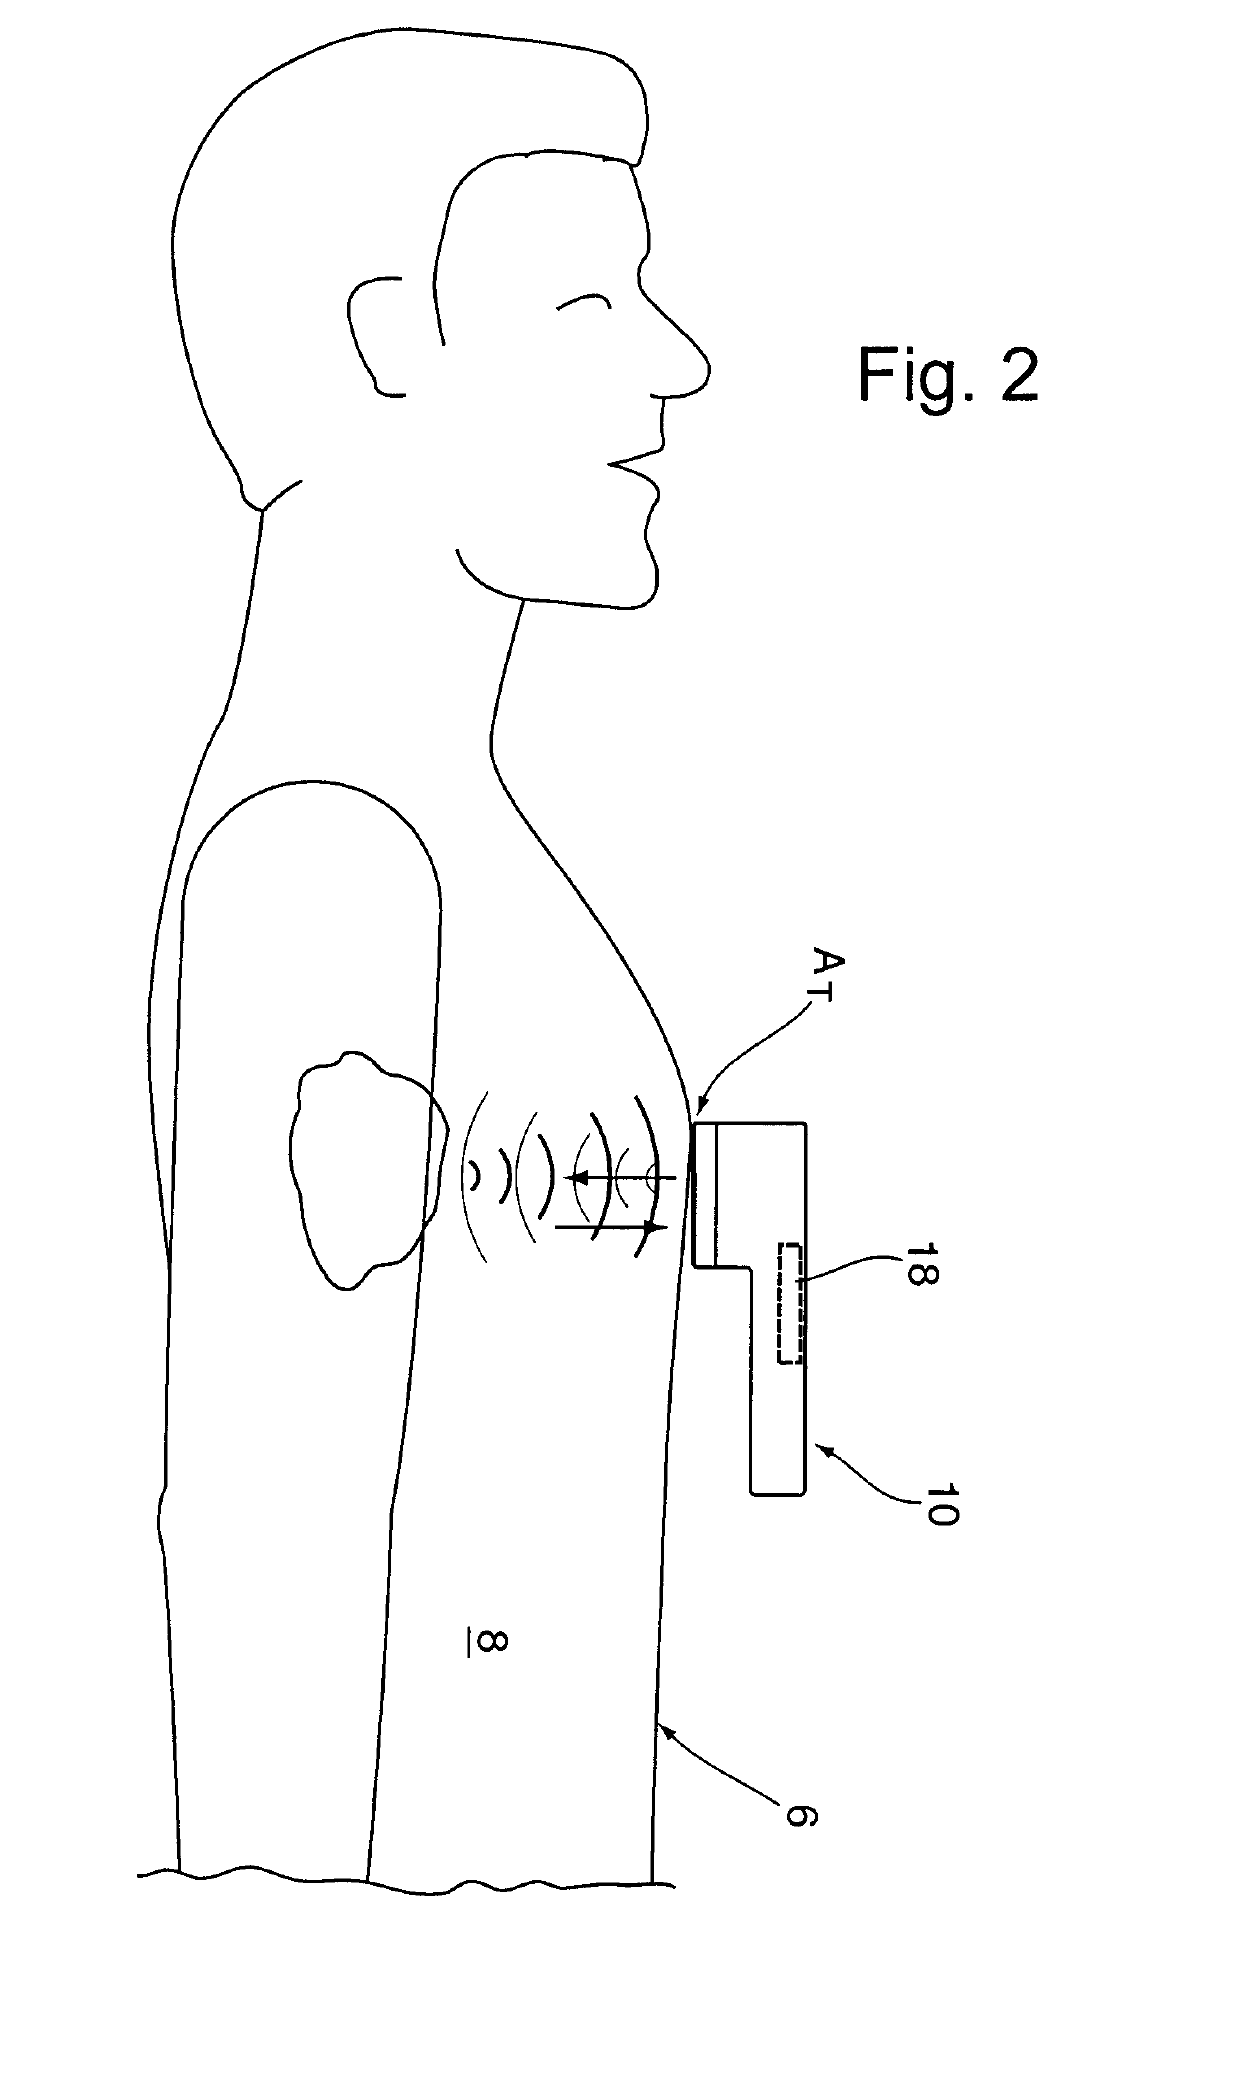 Device and method using damped harmonic analysis for automated pulmonary and abdominal examination